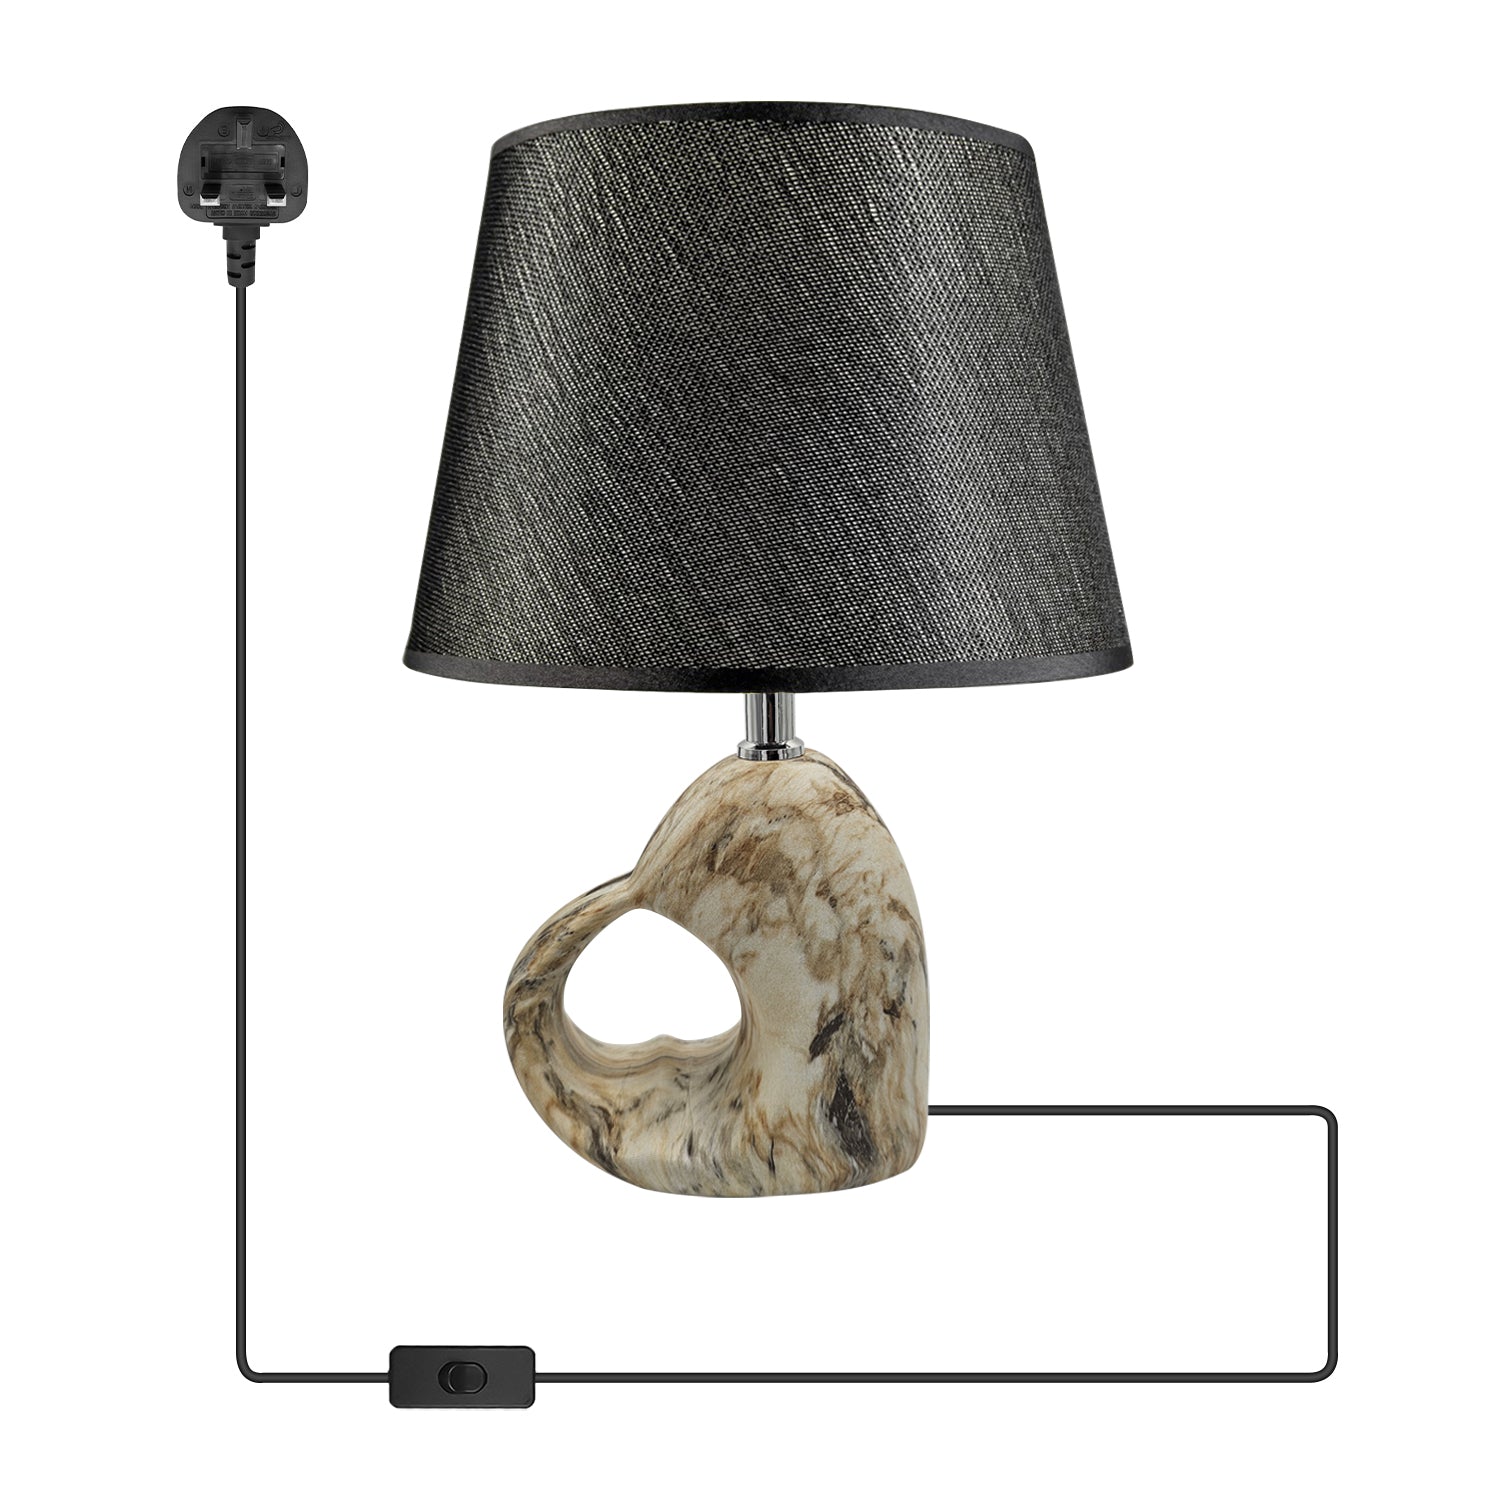 Modern Stylish Table lamp perfect for your Home